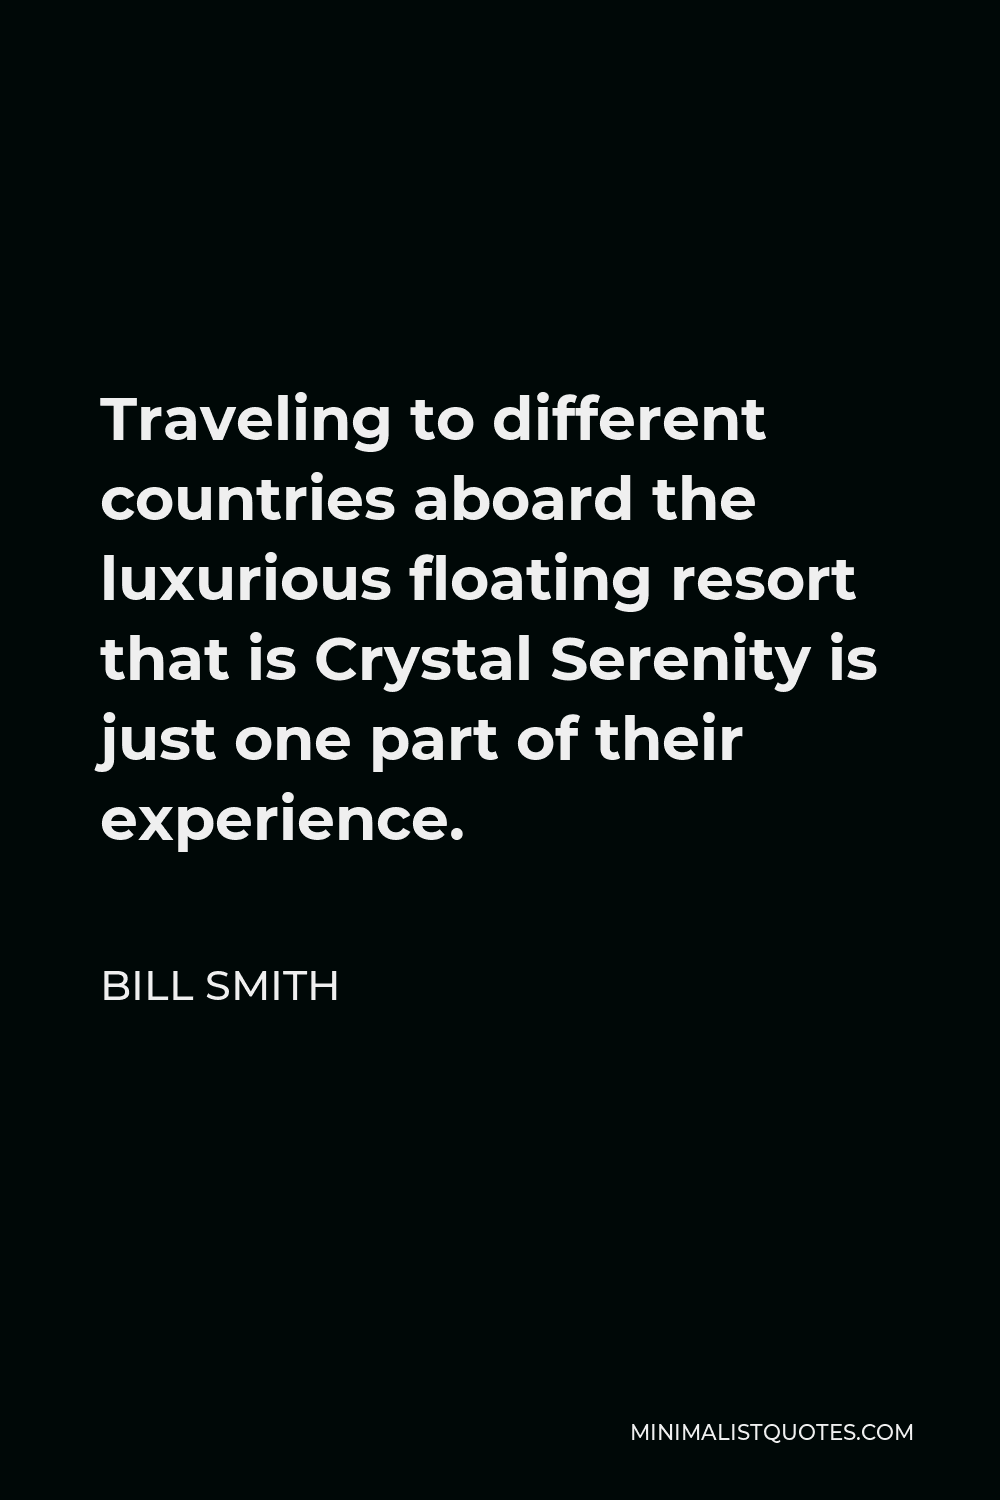 Bill Smith Quote - Traveling to different countries aboard the luxurious floating resort that is Crystal Serenity is just one part of their experience.